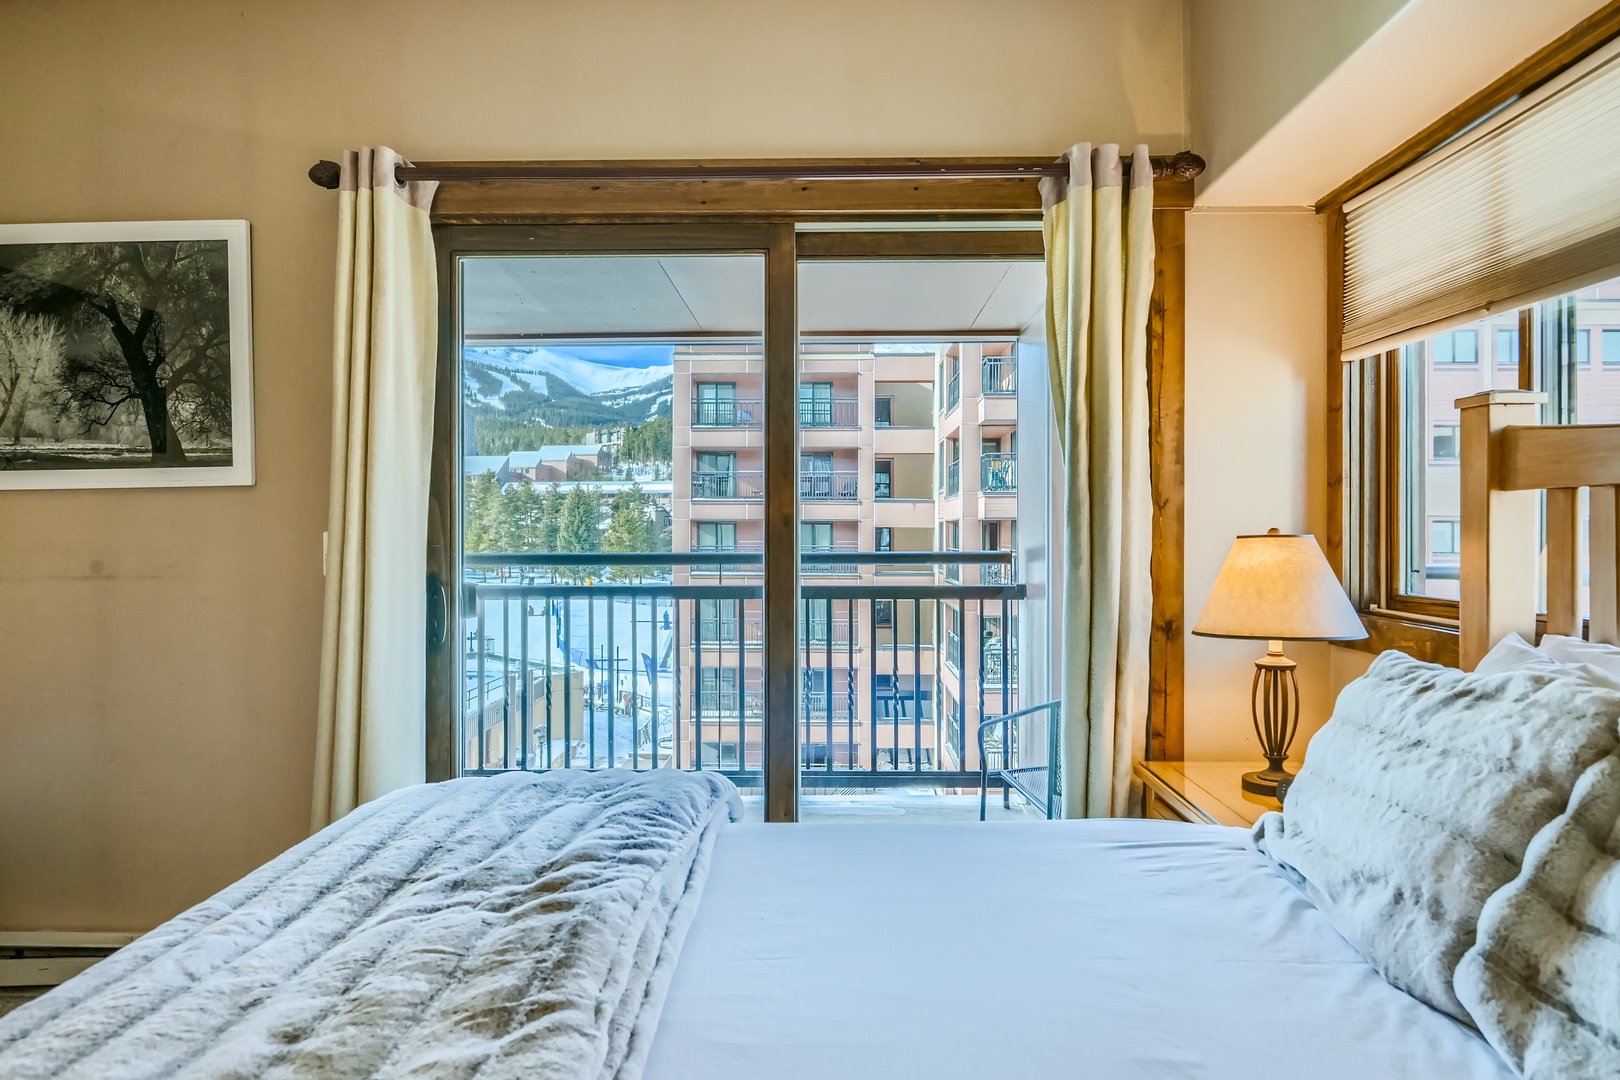 The private bedroom features a plush queen bed & stunning balcony views